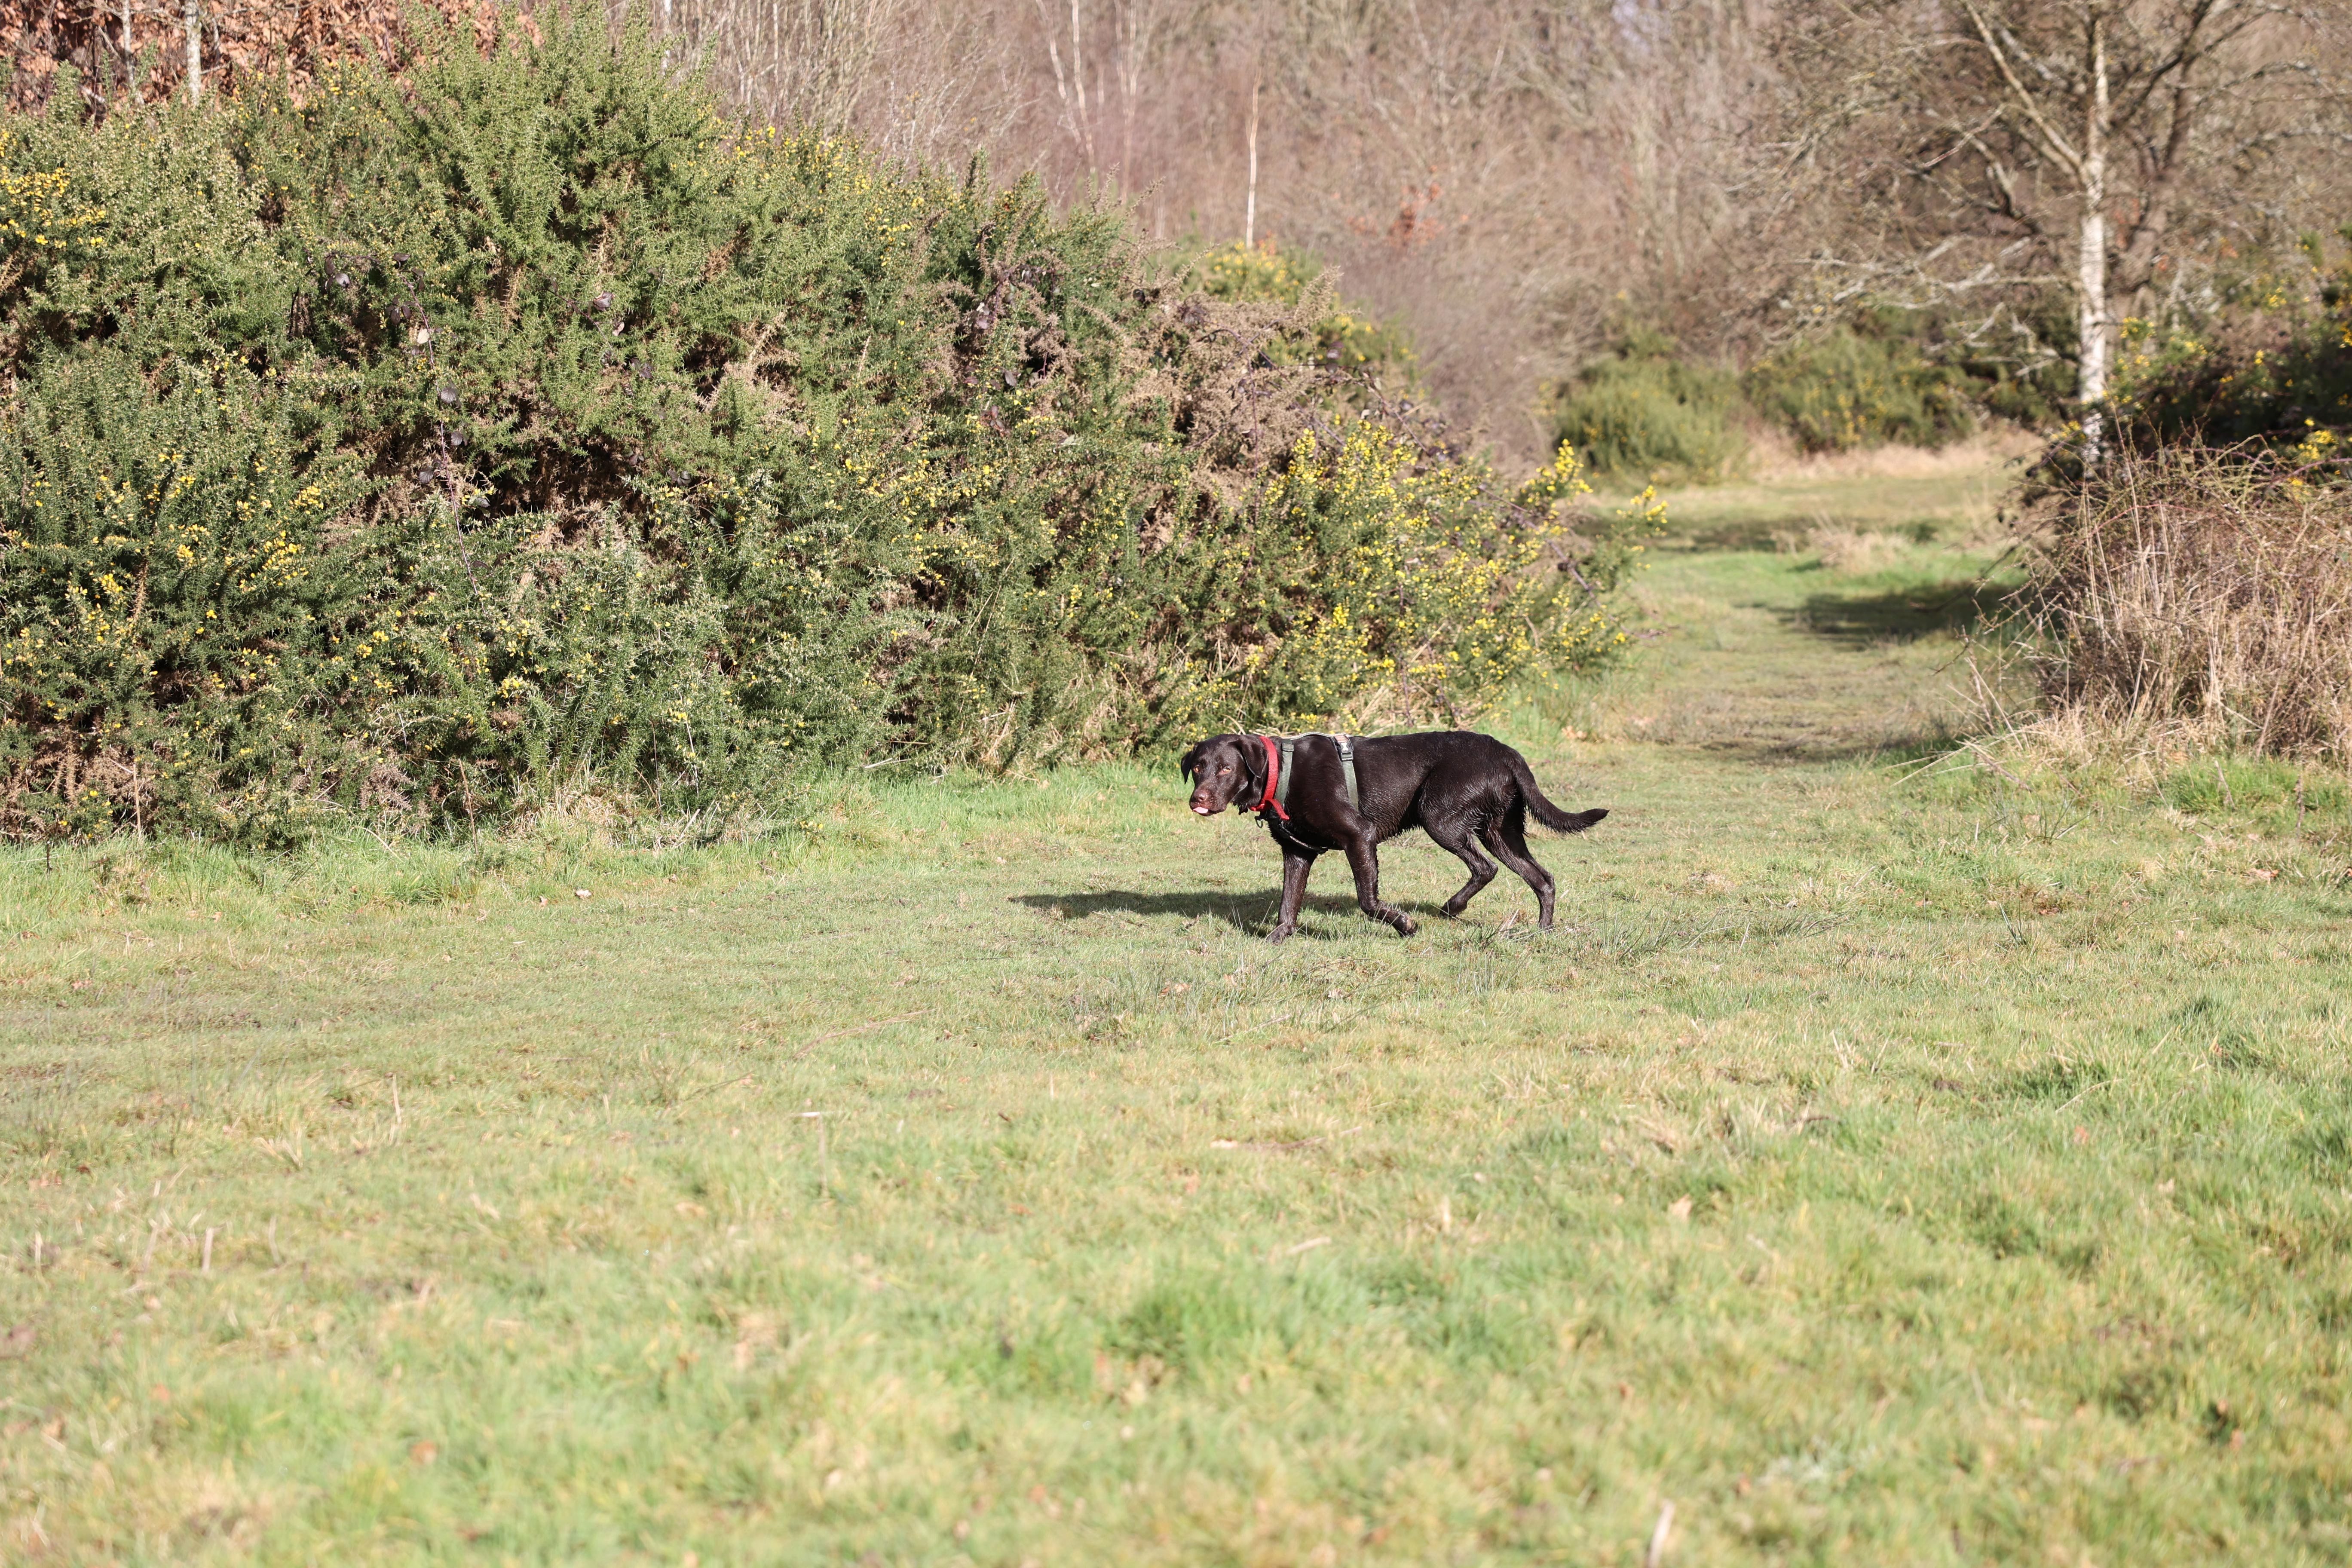 A shot taken with the Canon EOS R6. It shows a Labrador dog standing in a field